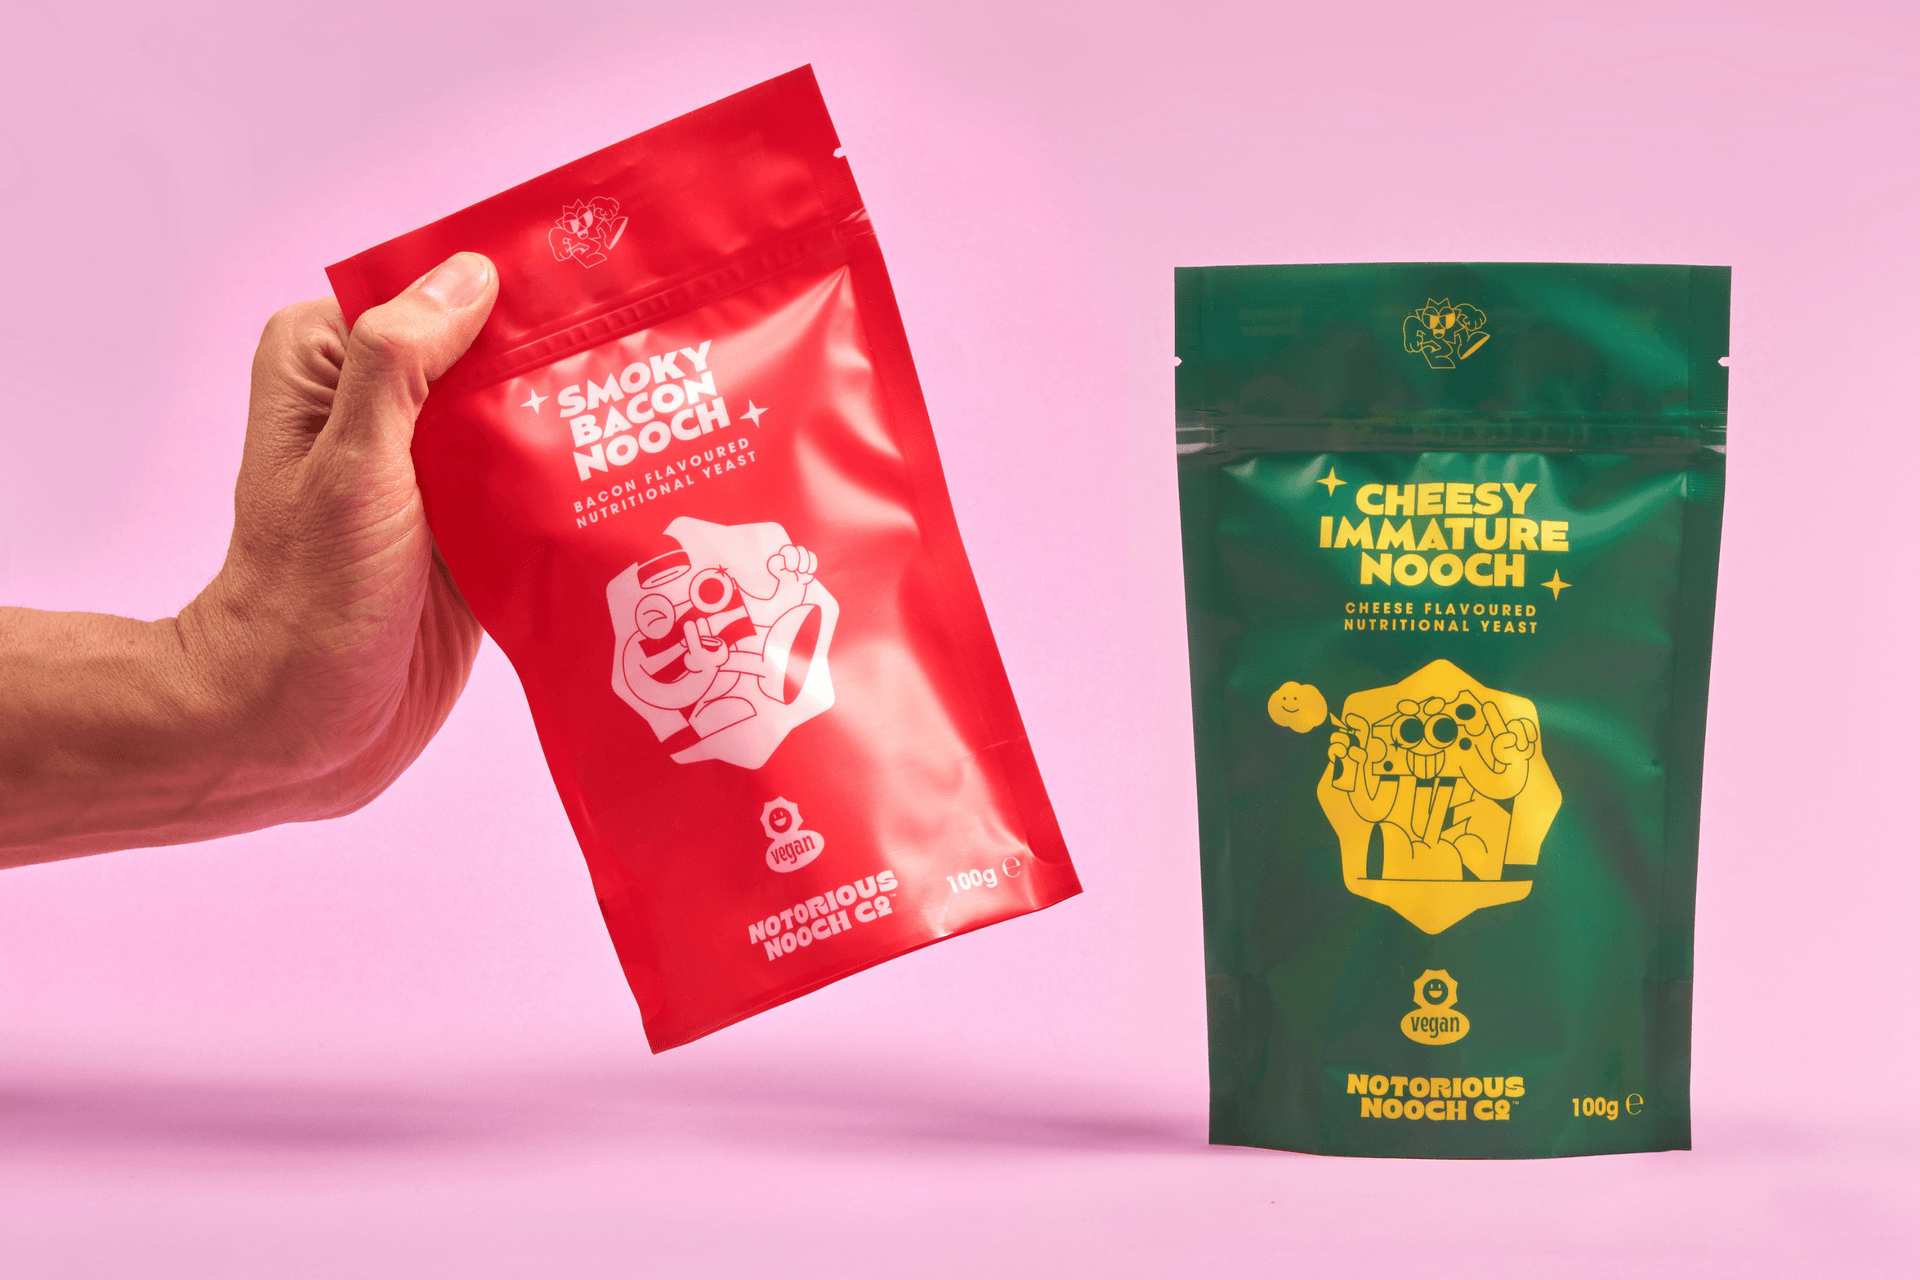 UK’s First Naturally Flavoured Nutritional Yeast Launches To Pack a Punch for Plant-Based Diets